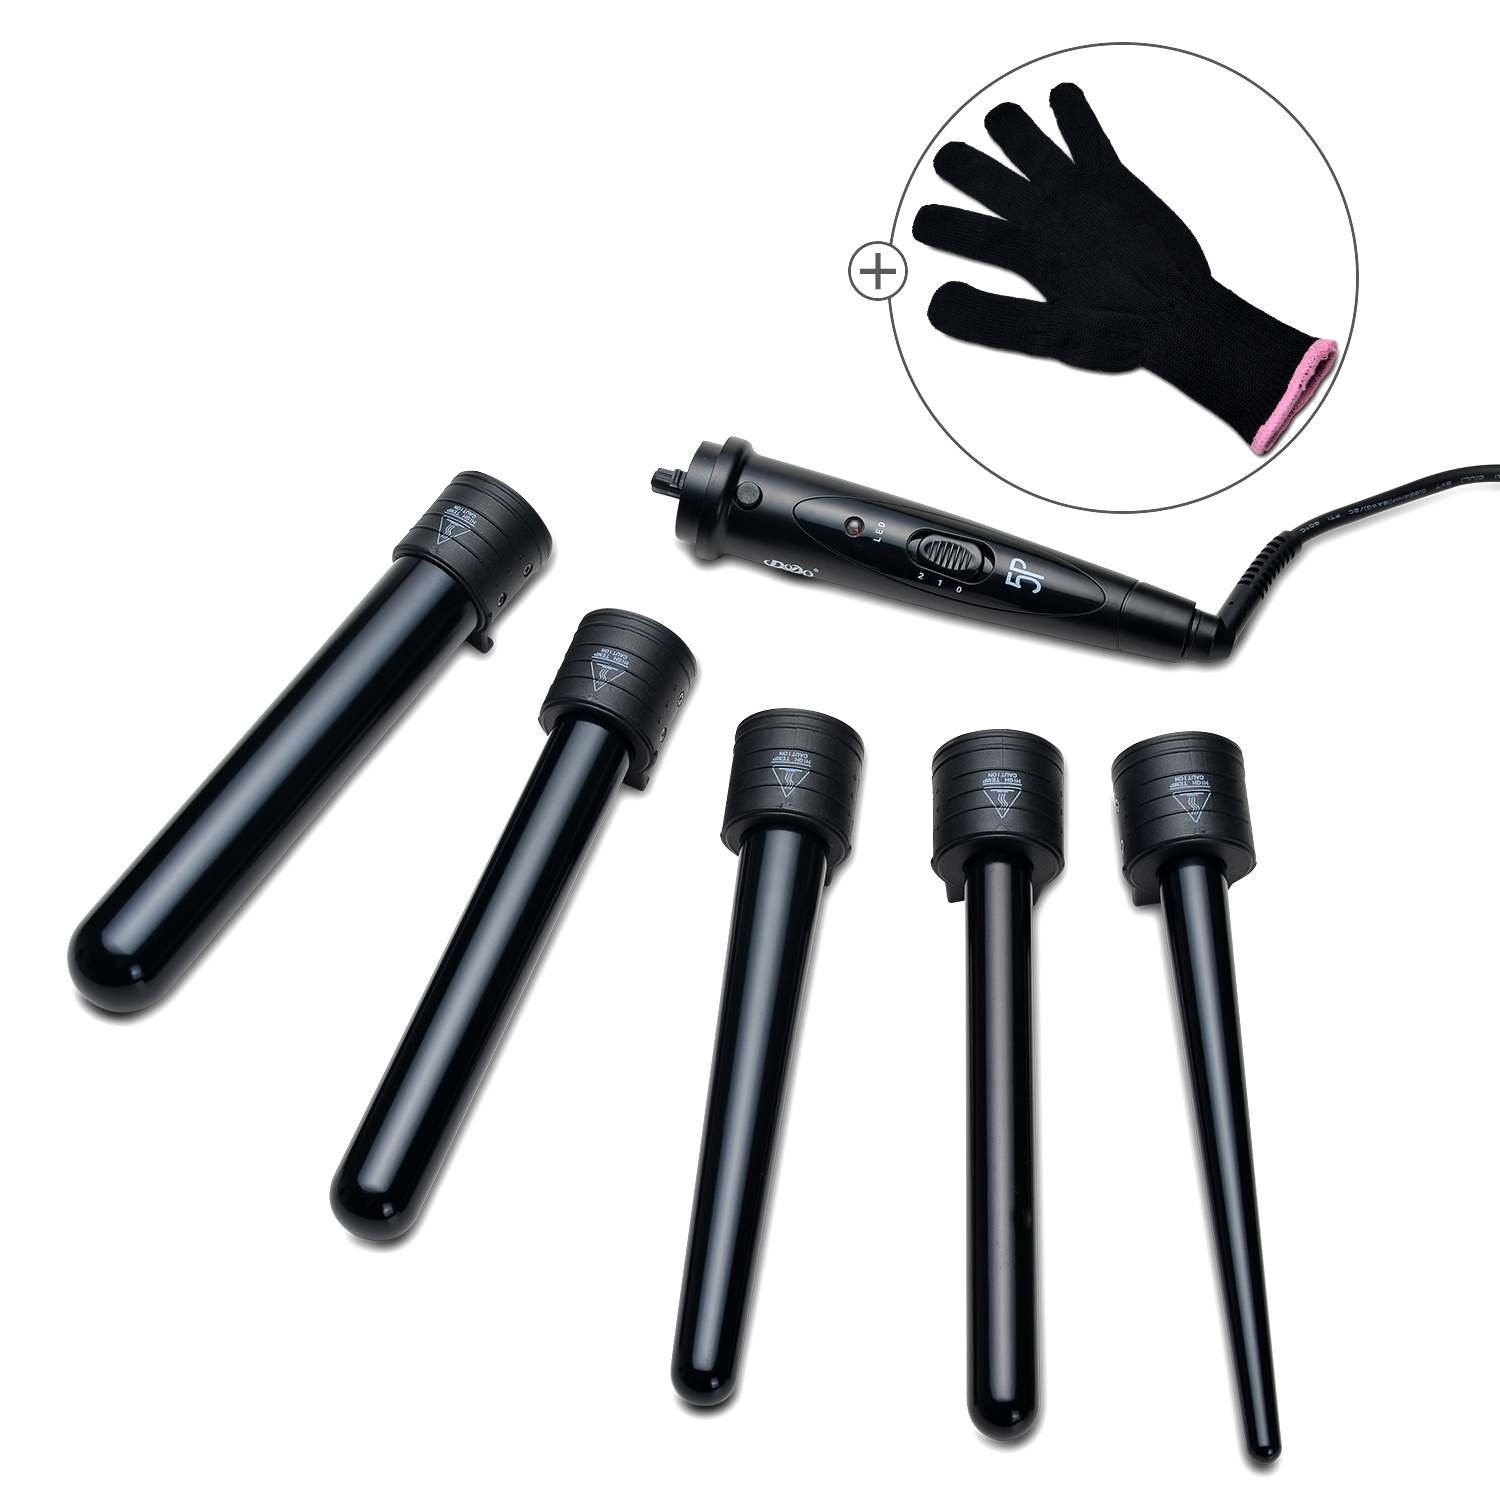 AGPtek 5-IN-1 Curling Iron and Wand set Hair Curler w/ Interchangeable  Barrels and Heat-Resistant Glove